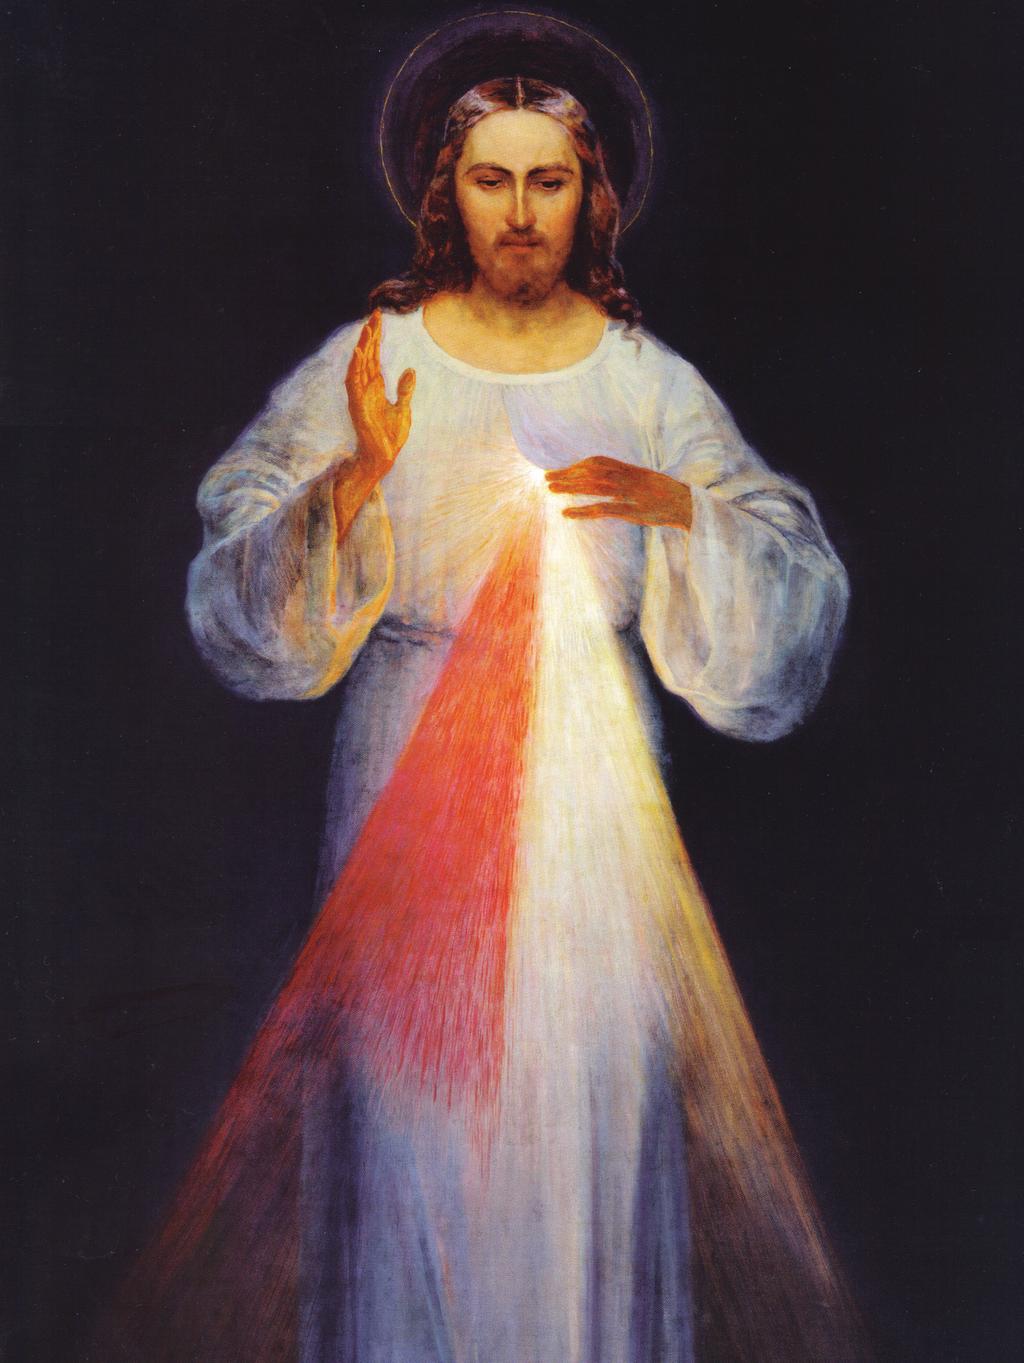 APRIL 3, 2016 DIVINE MERCY SUNDAY HOW CAN WE HELP YOU? MASS SCHEDULE CONFESSIONS PHONE SUNDAYS MONDAYS, WEDNESDAYS, & FRIDAYS (985) 447-2013 WEB www.ctr-htdiocese.org EMAIL ctrchurch@htdiocese.